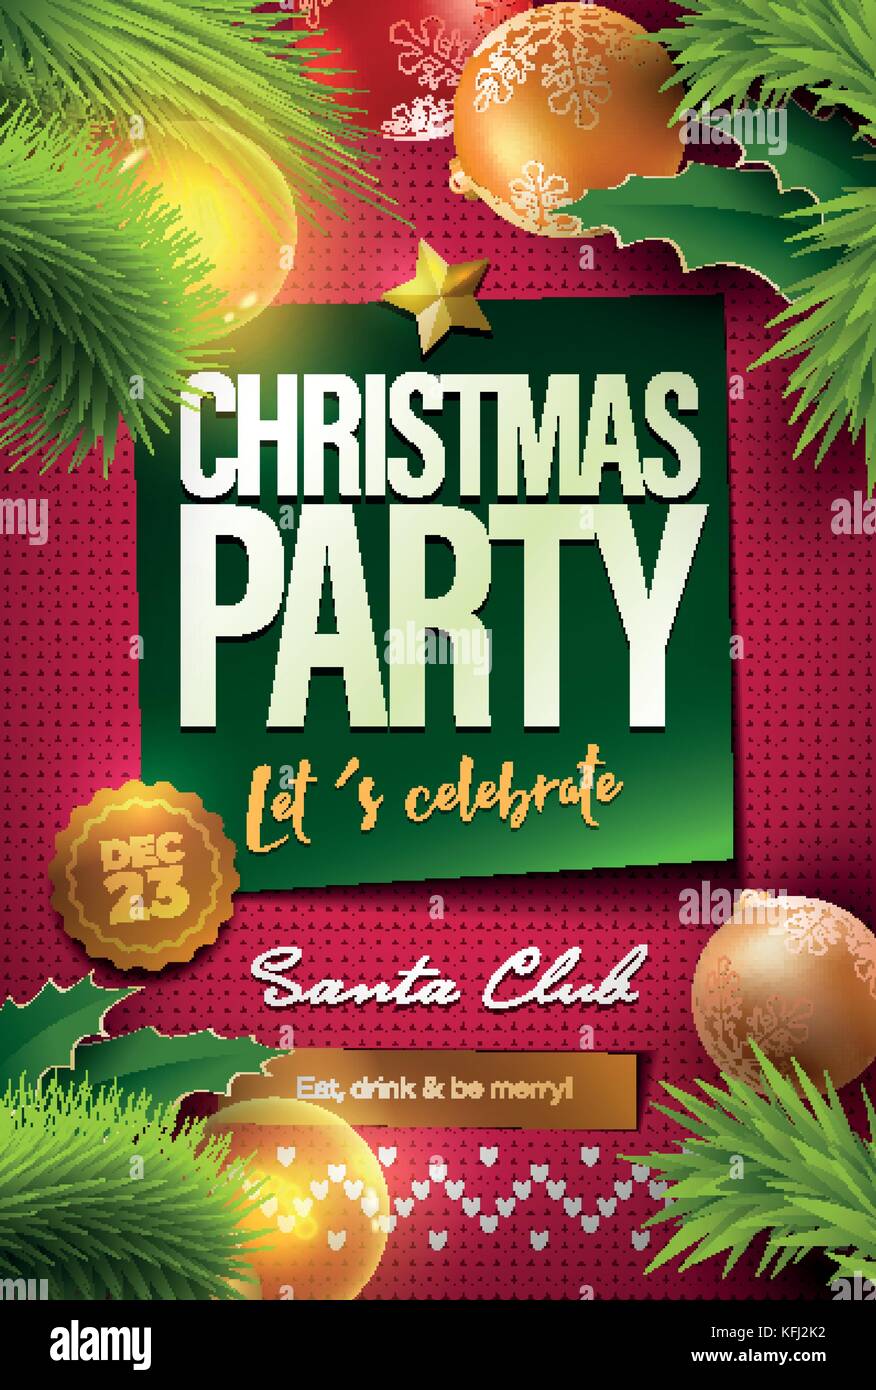 Merry Christmas Party Poster Design Template on vector knitted pattern. Elements are layered separately in vector file. Global colors. Easy editable. Stock Vector